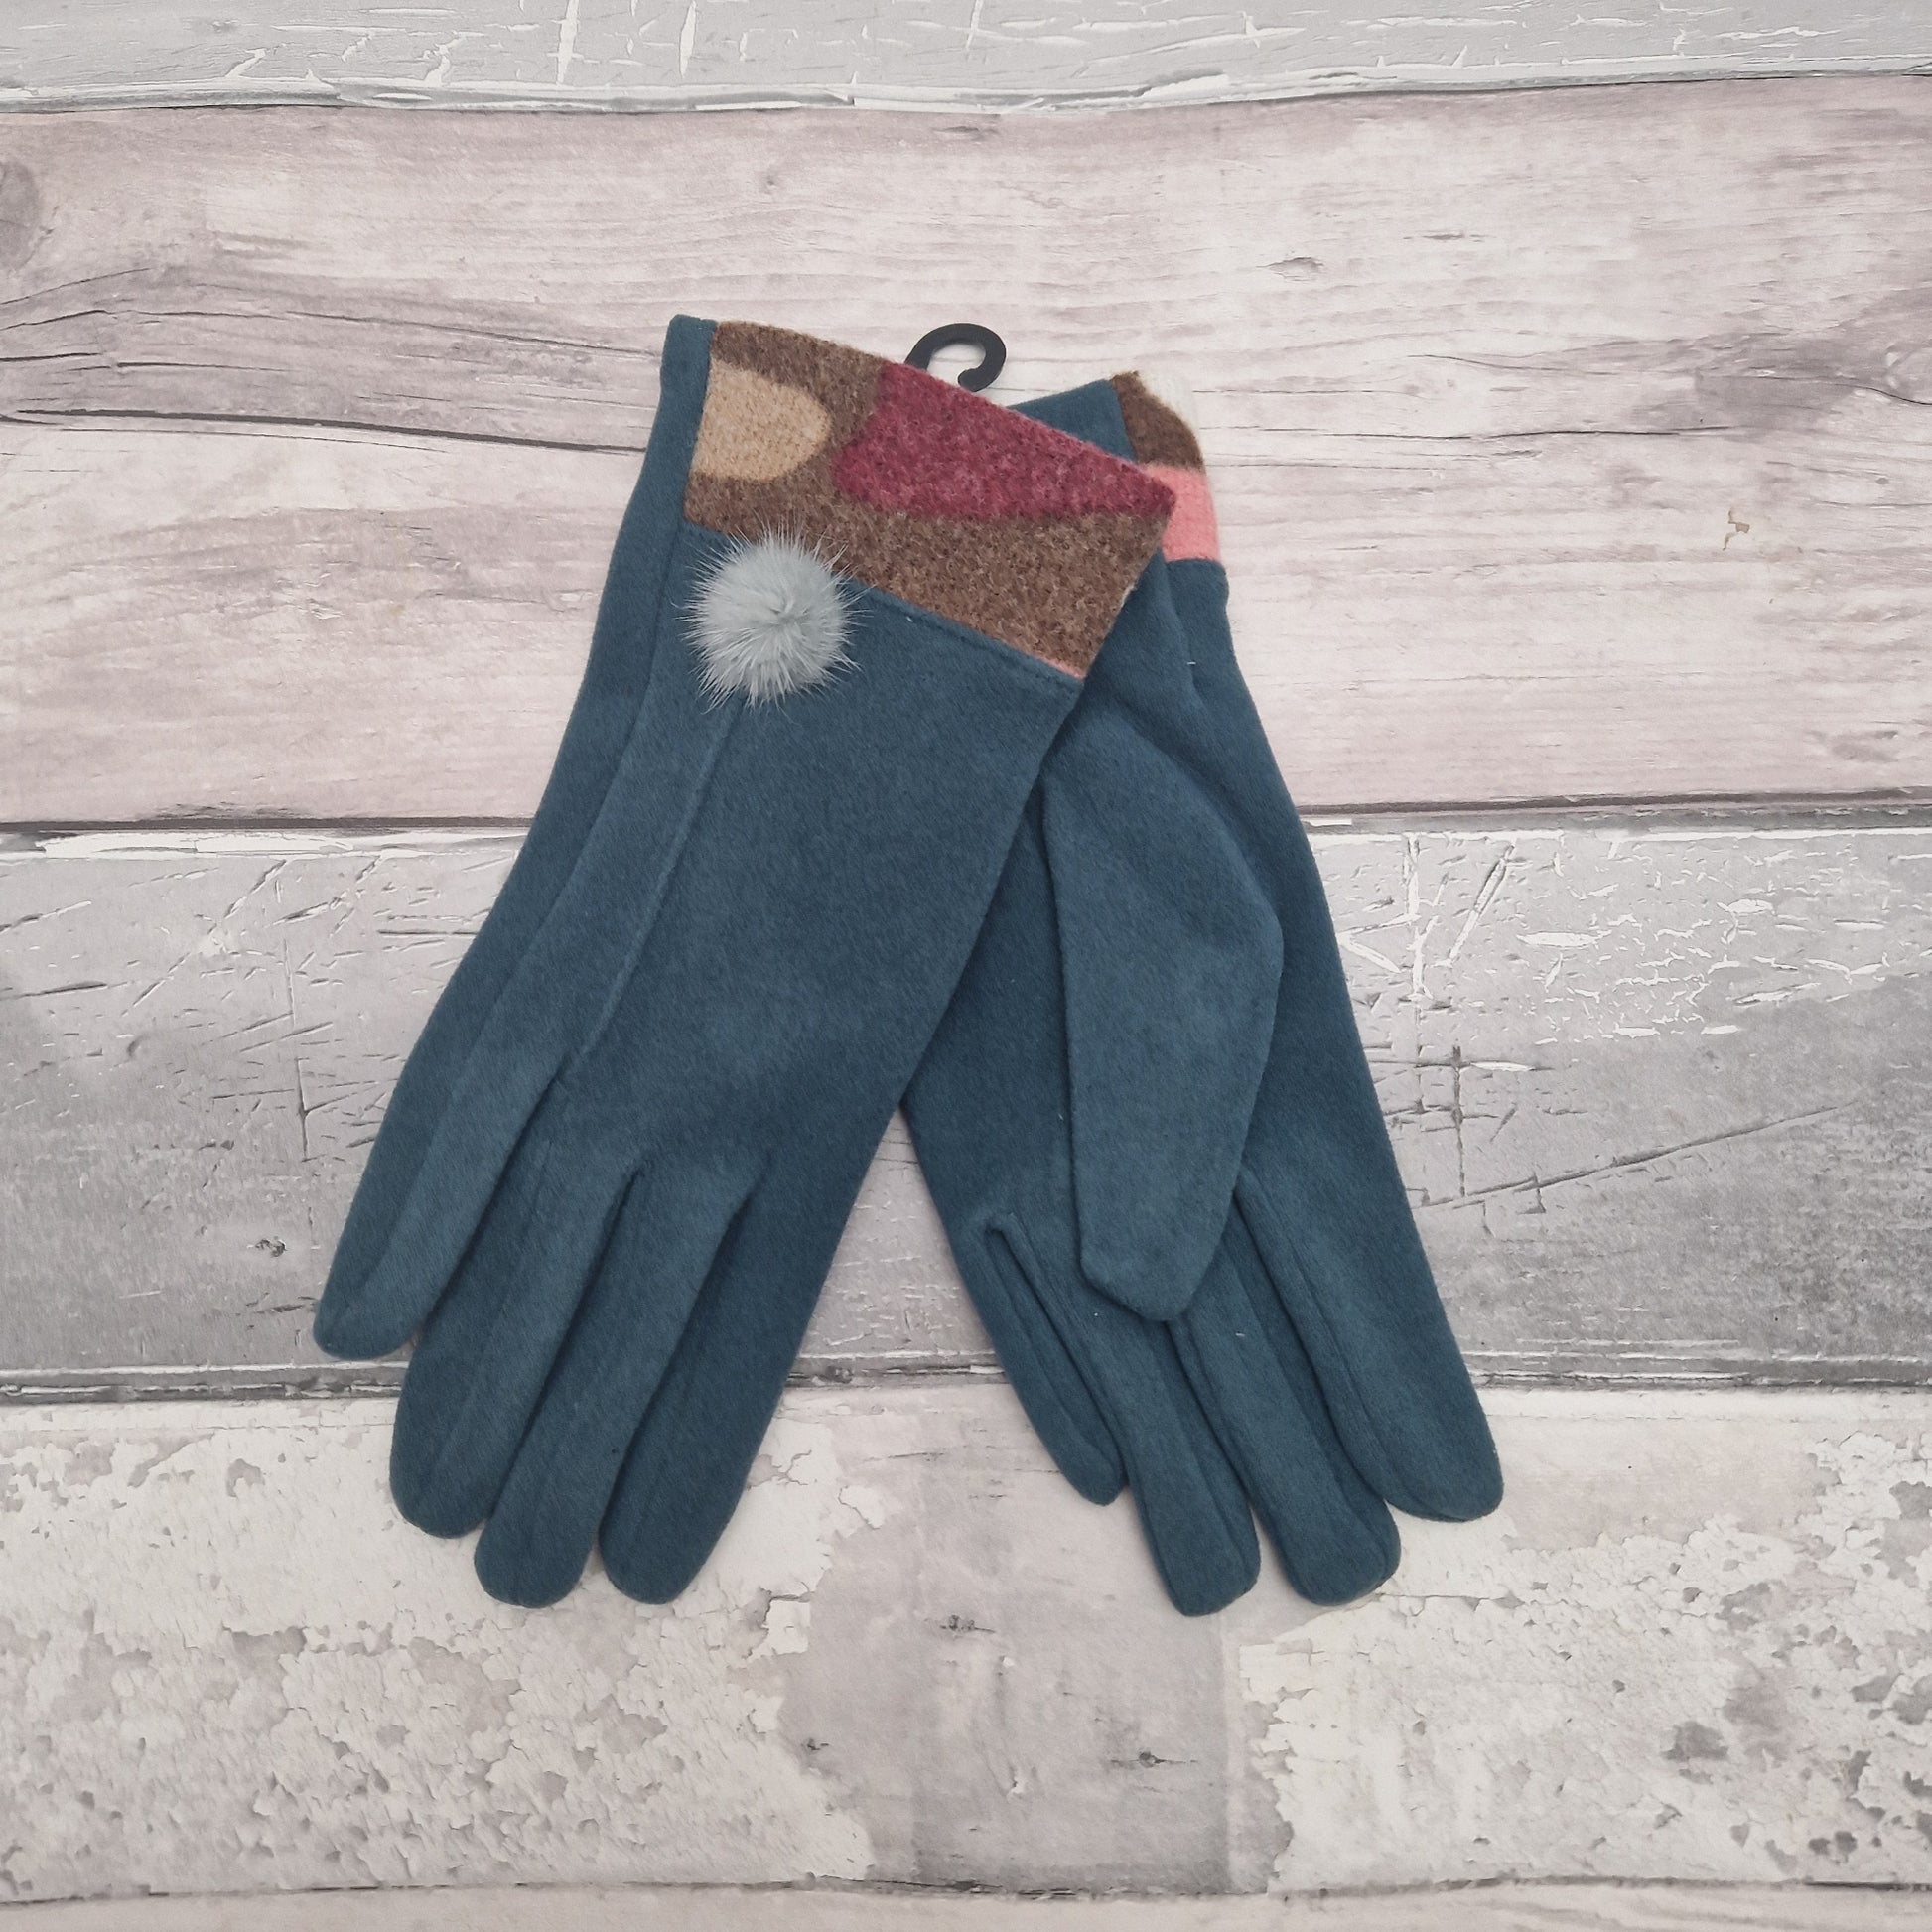 Turquoise Coloured Gloves presented in a Gift Box with a Jazzy coloured cuff and fluffy pom pom finish.